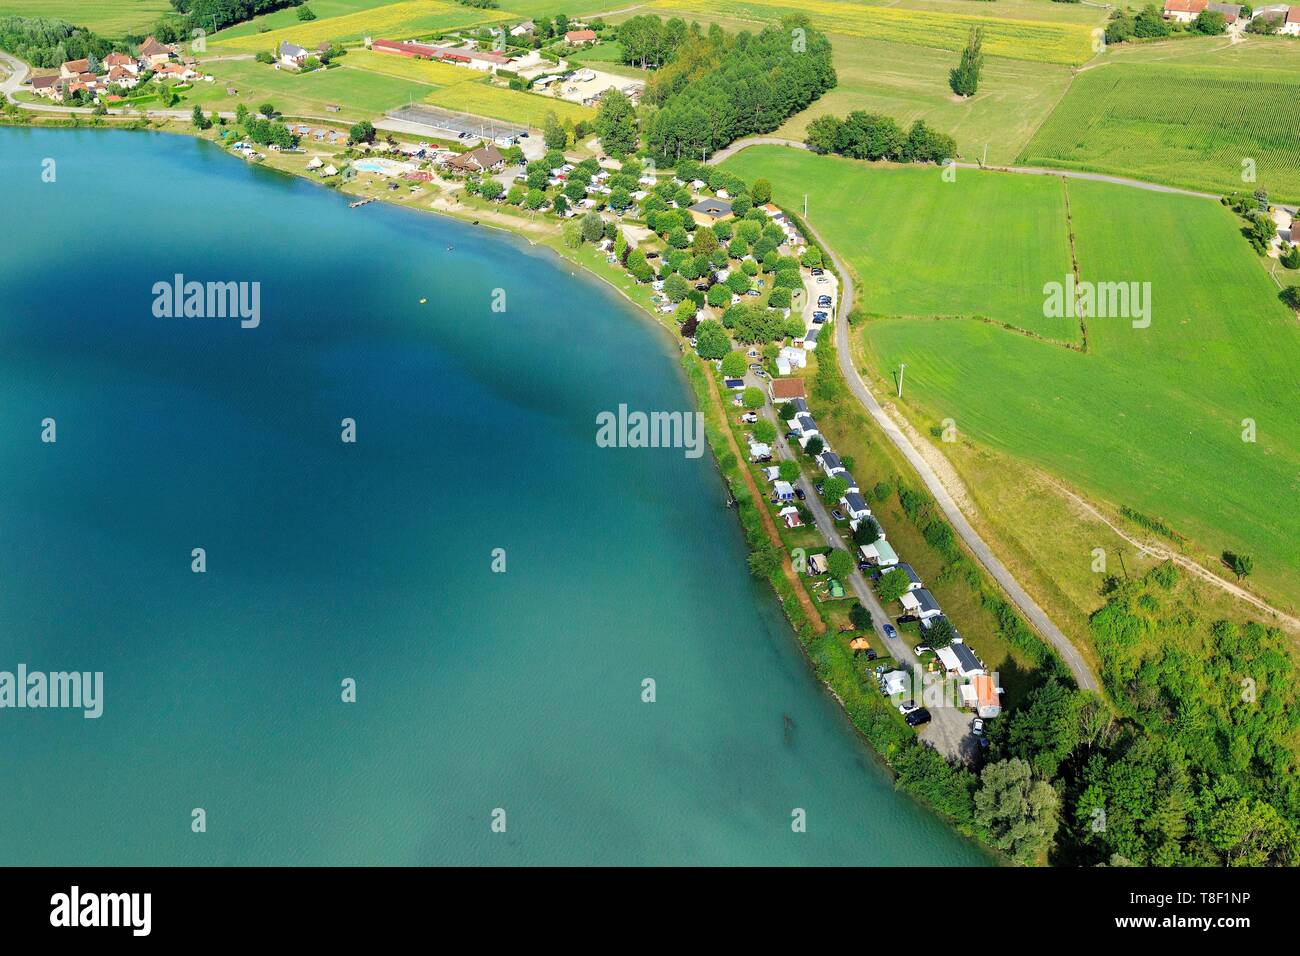 France, Ain, Massignieu de Rives, king's bed lake on the Rhone (aerial view) Stock Photo